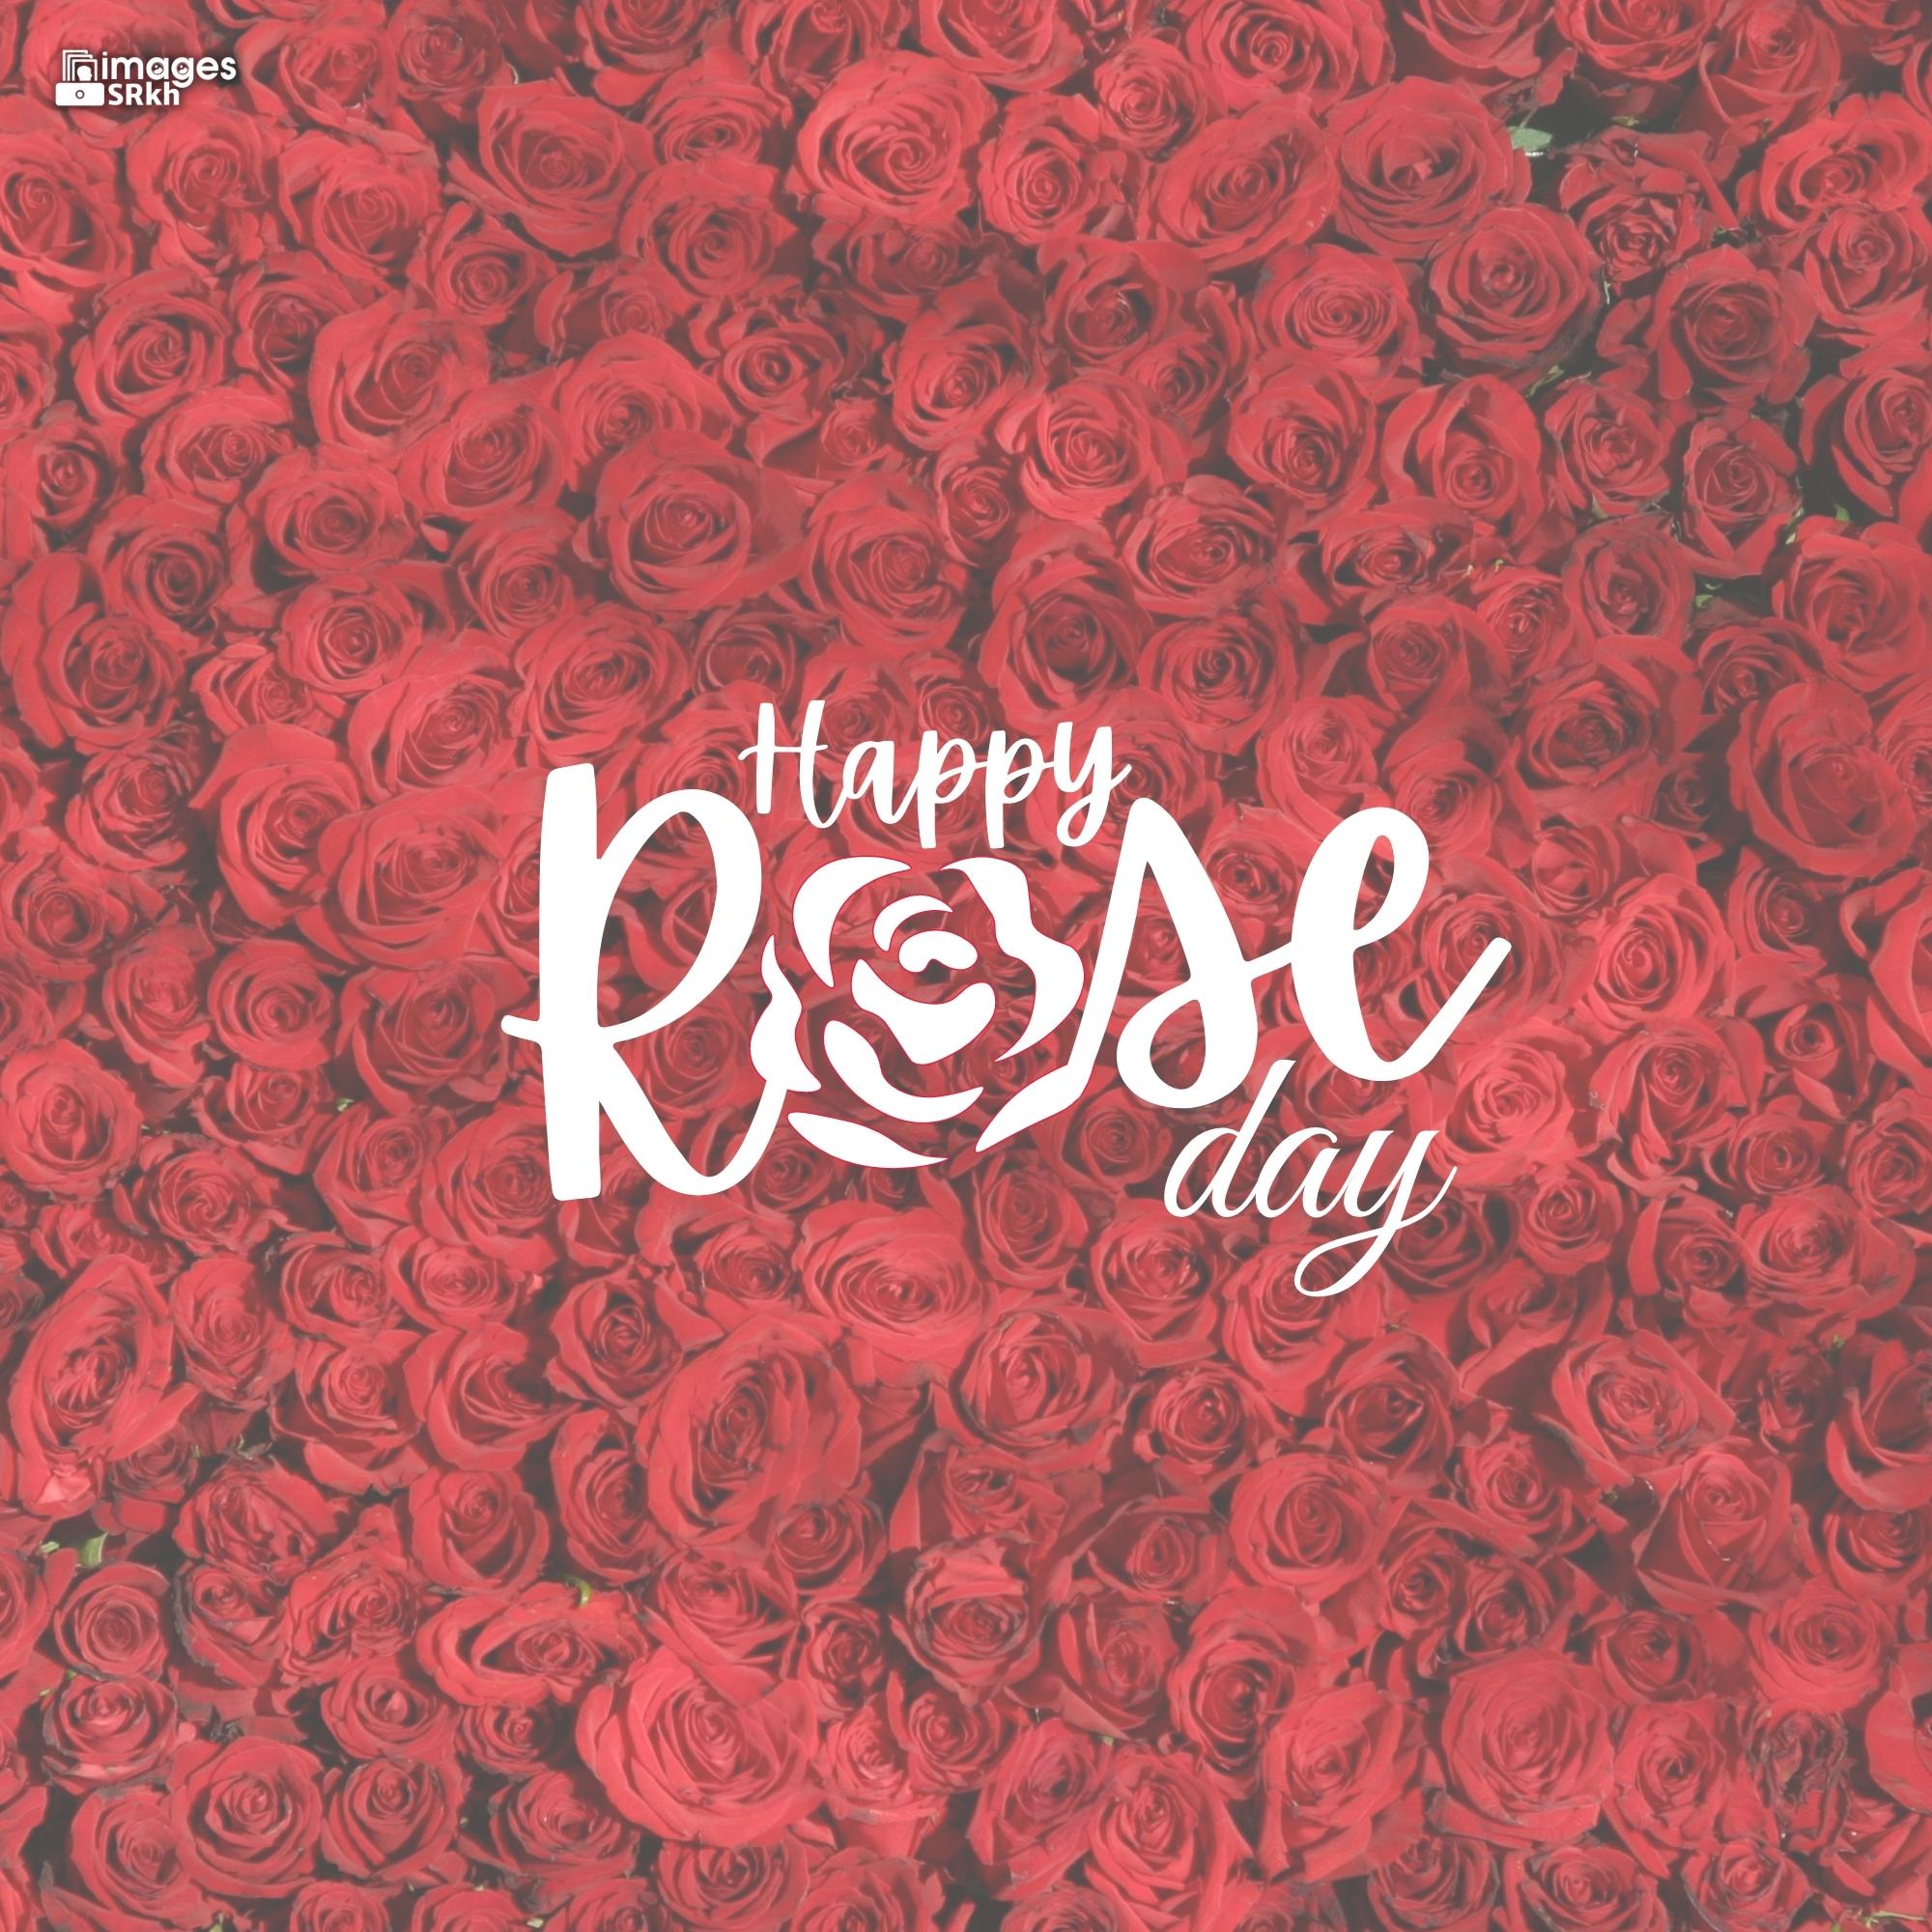 Happy Rose Day Image Hd Download (17)